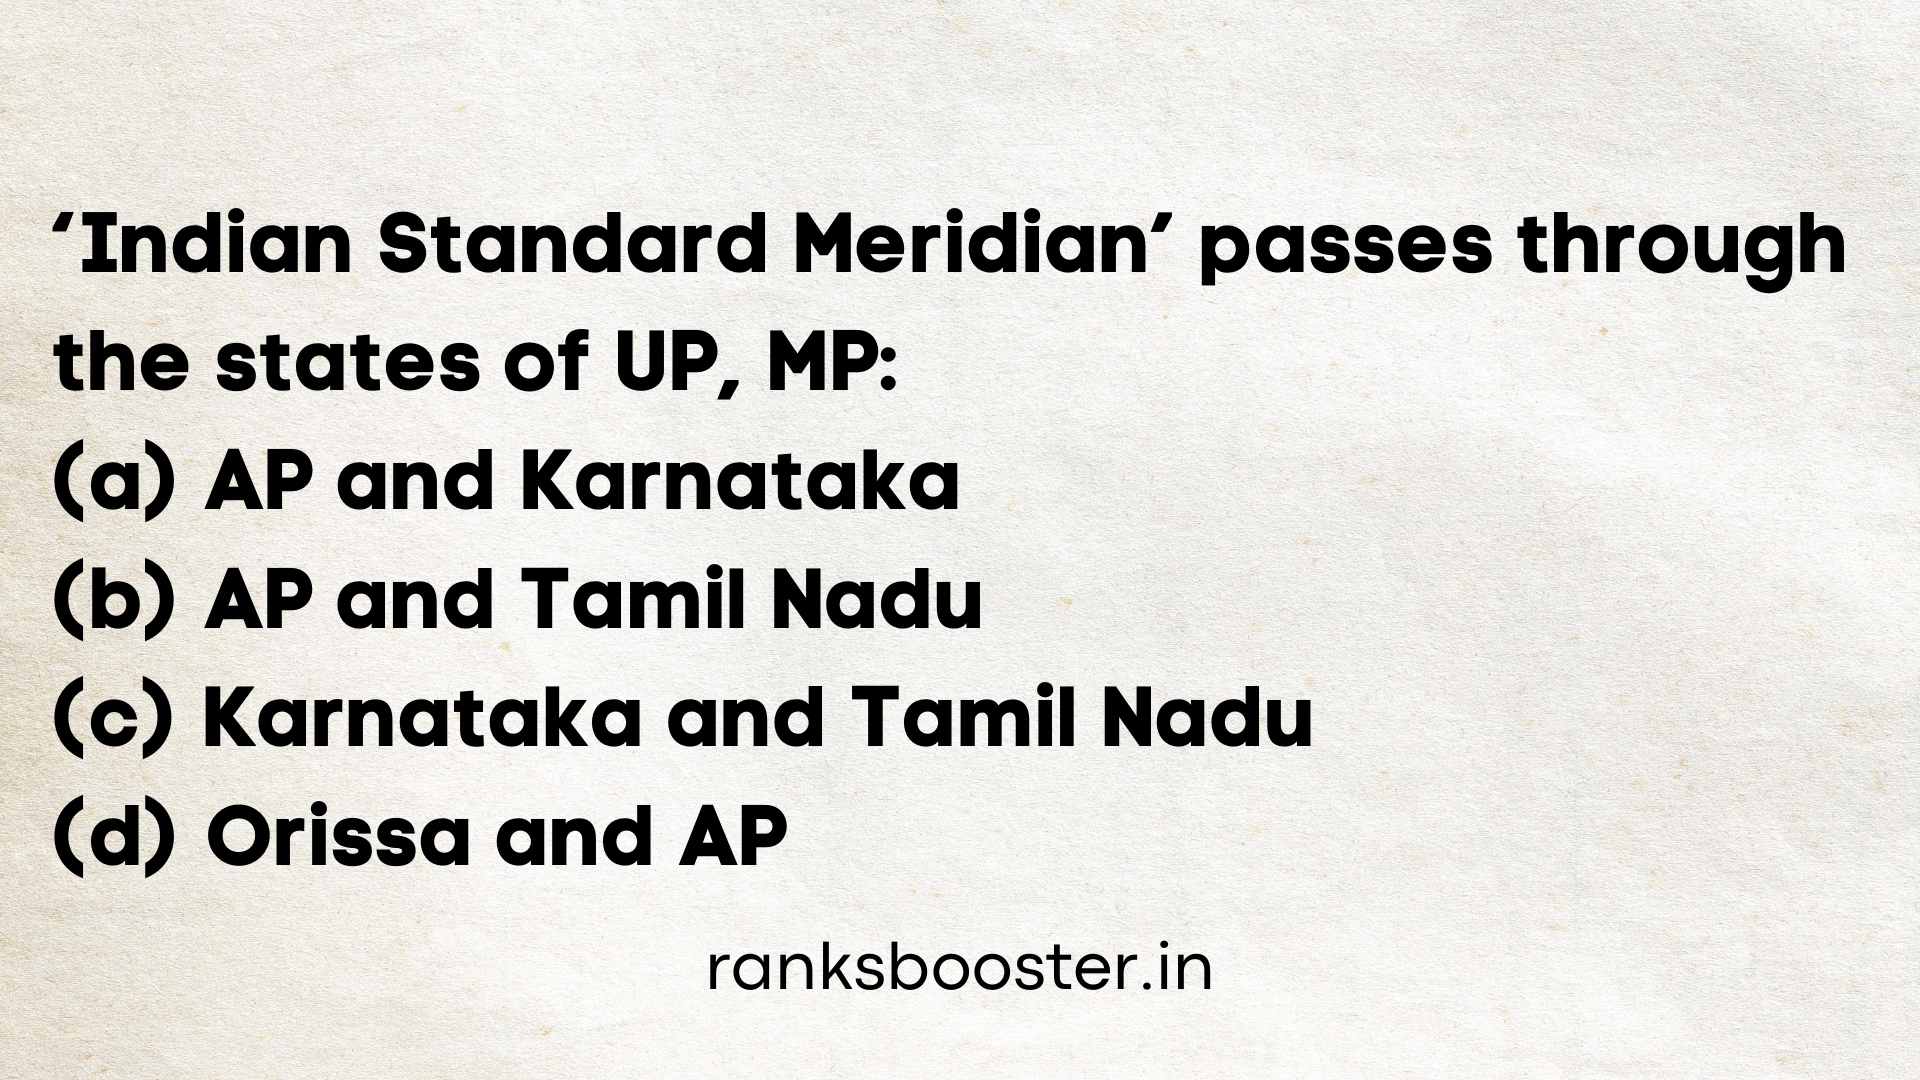 ‘Indian Standard Meridian’ passes through the states of UP, MP: (A) AP and Karnataka (B) AP and Tamil Nadu (C) Karnataka and Tamil Nadu (D) Orissa and AP